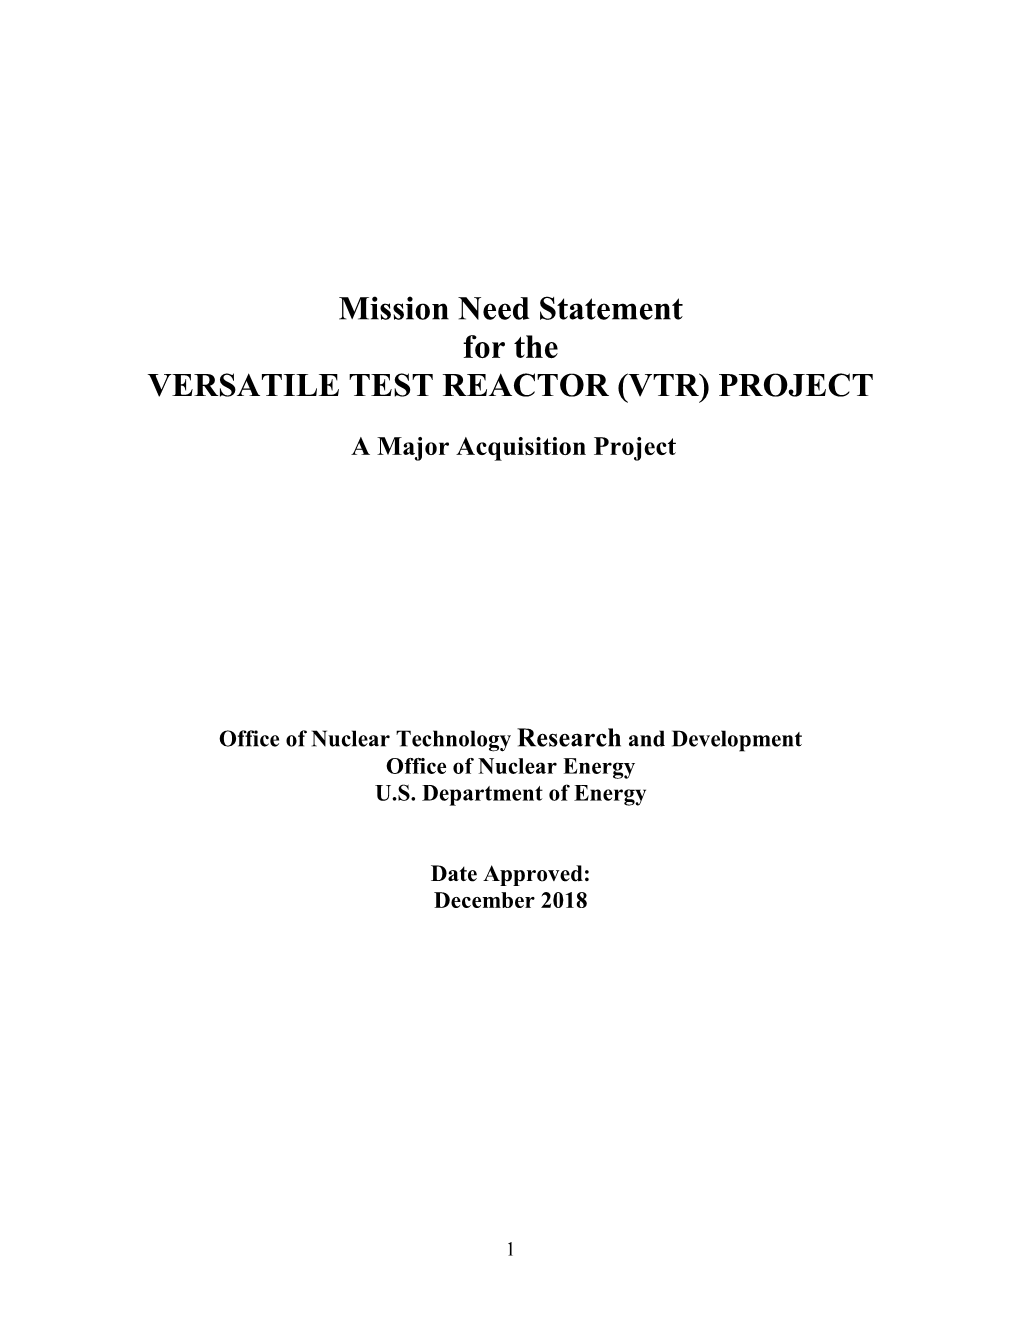 Mission Need Statement for the VERSATILE TEST REACTOR (VTR) PROJECT